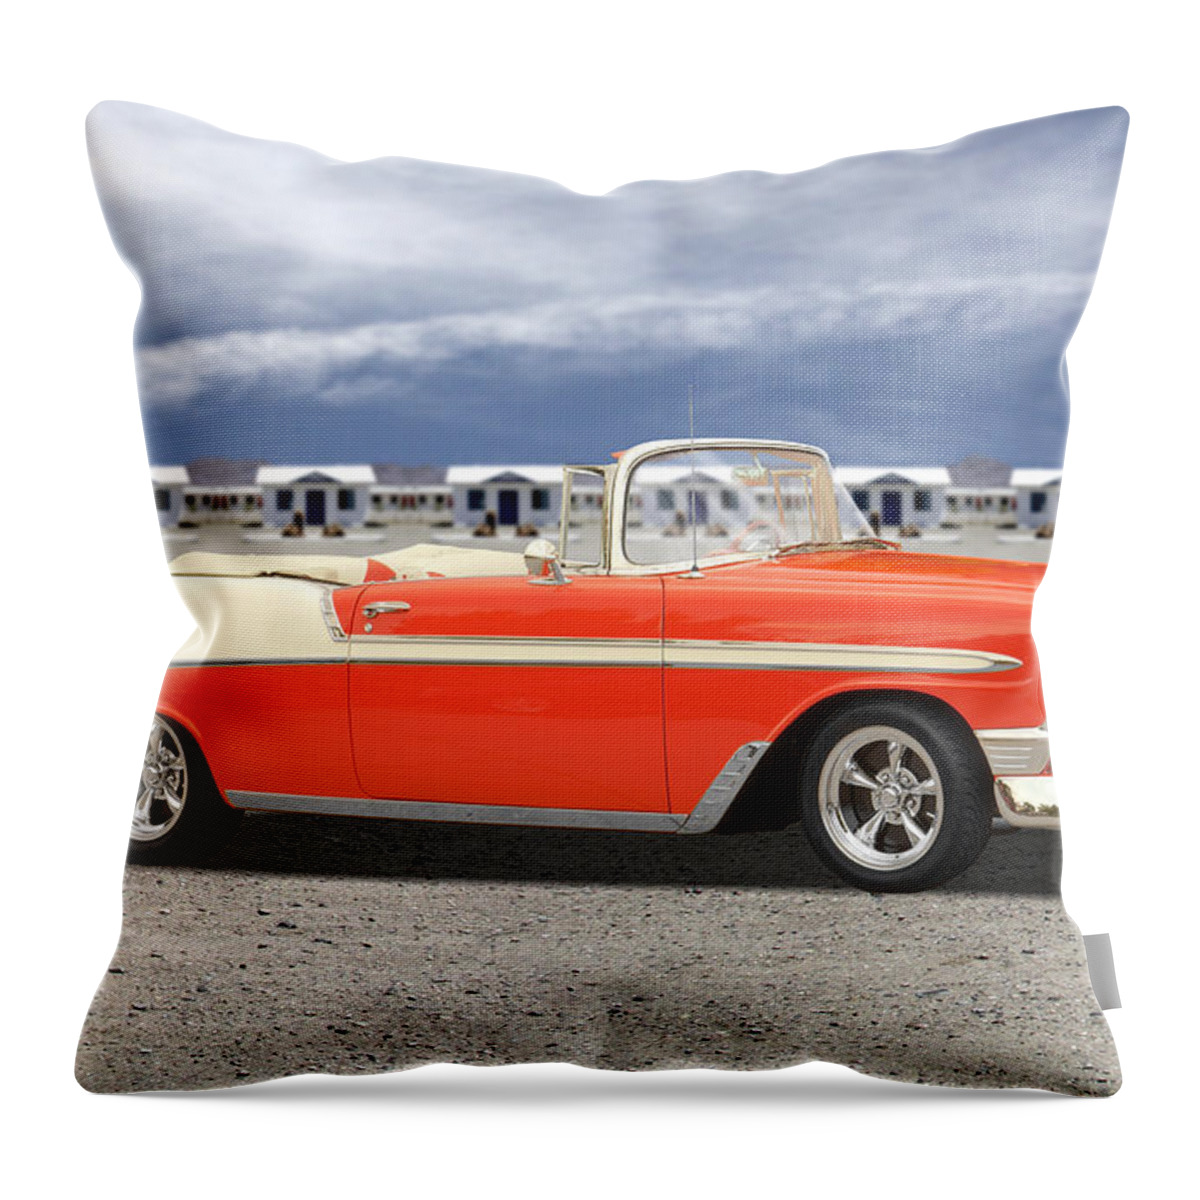 1956 Chevy Throw Pillow featuring the photograph 1956 Chevrolet Belair Convertible by Mike McGlothlen